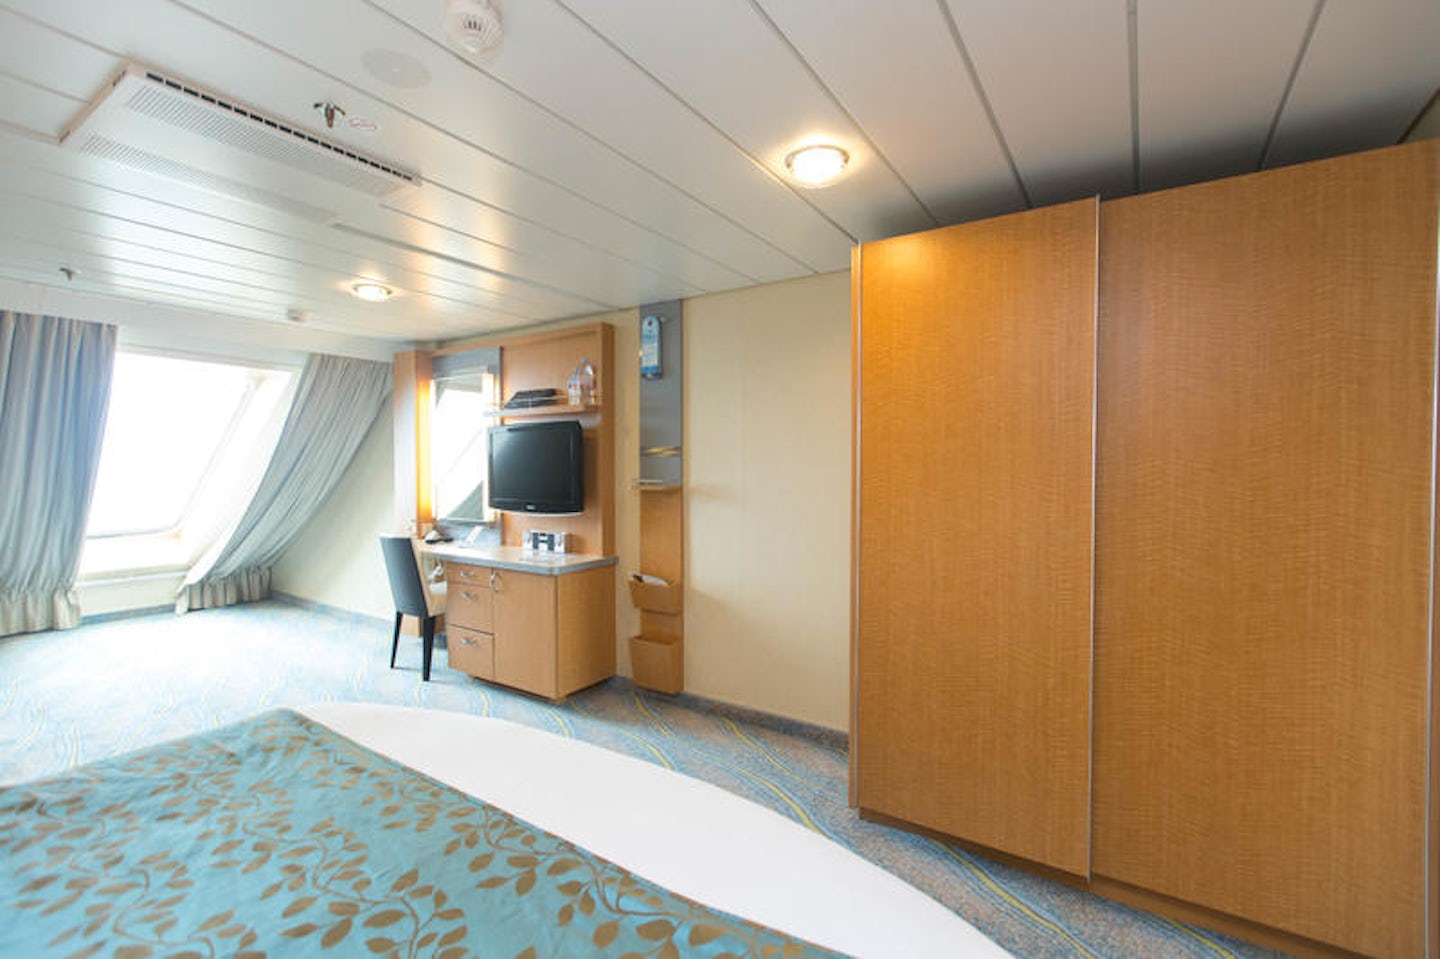 The Family Ocean-View Cabin on Allure of the Seas